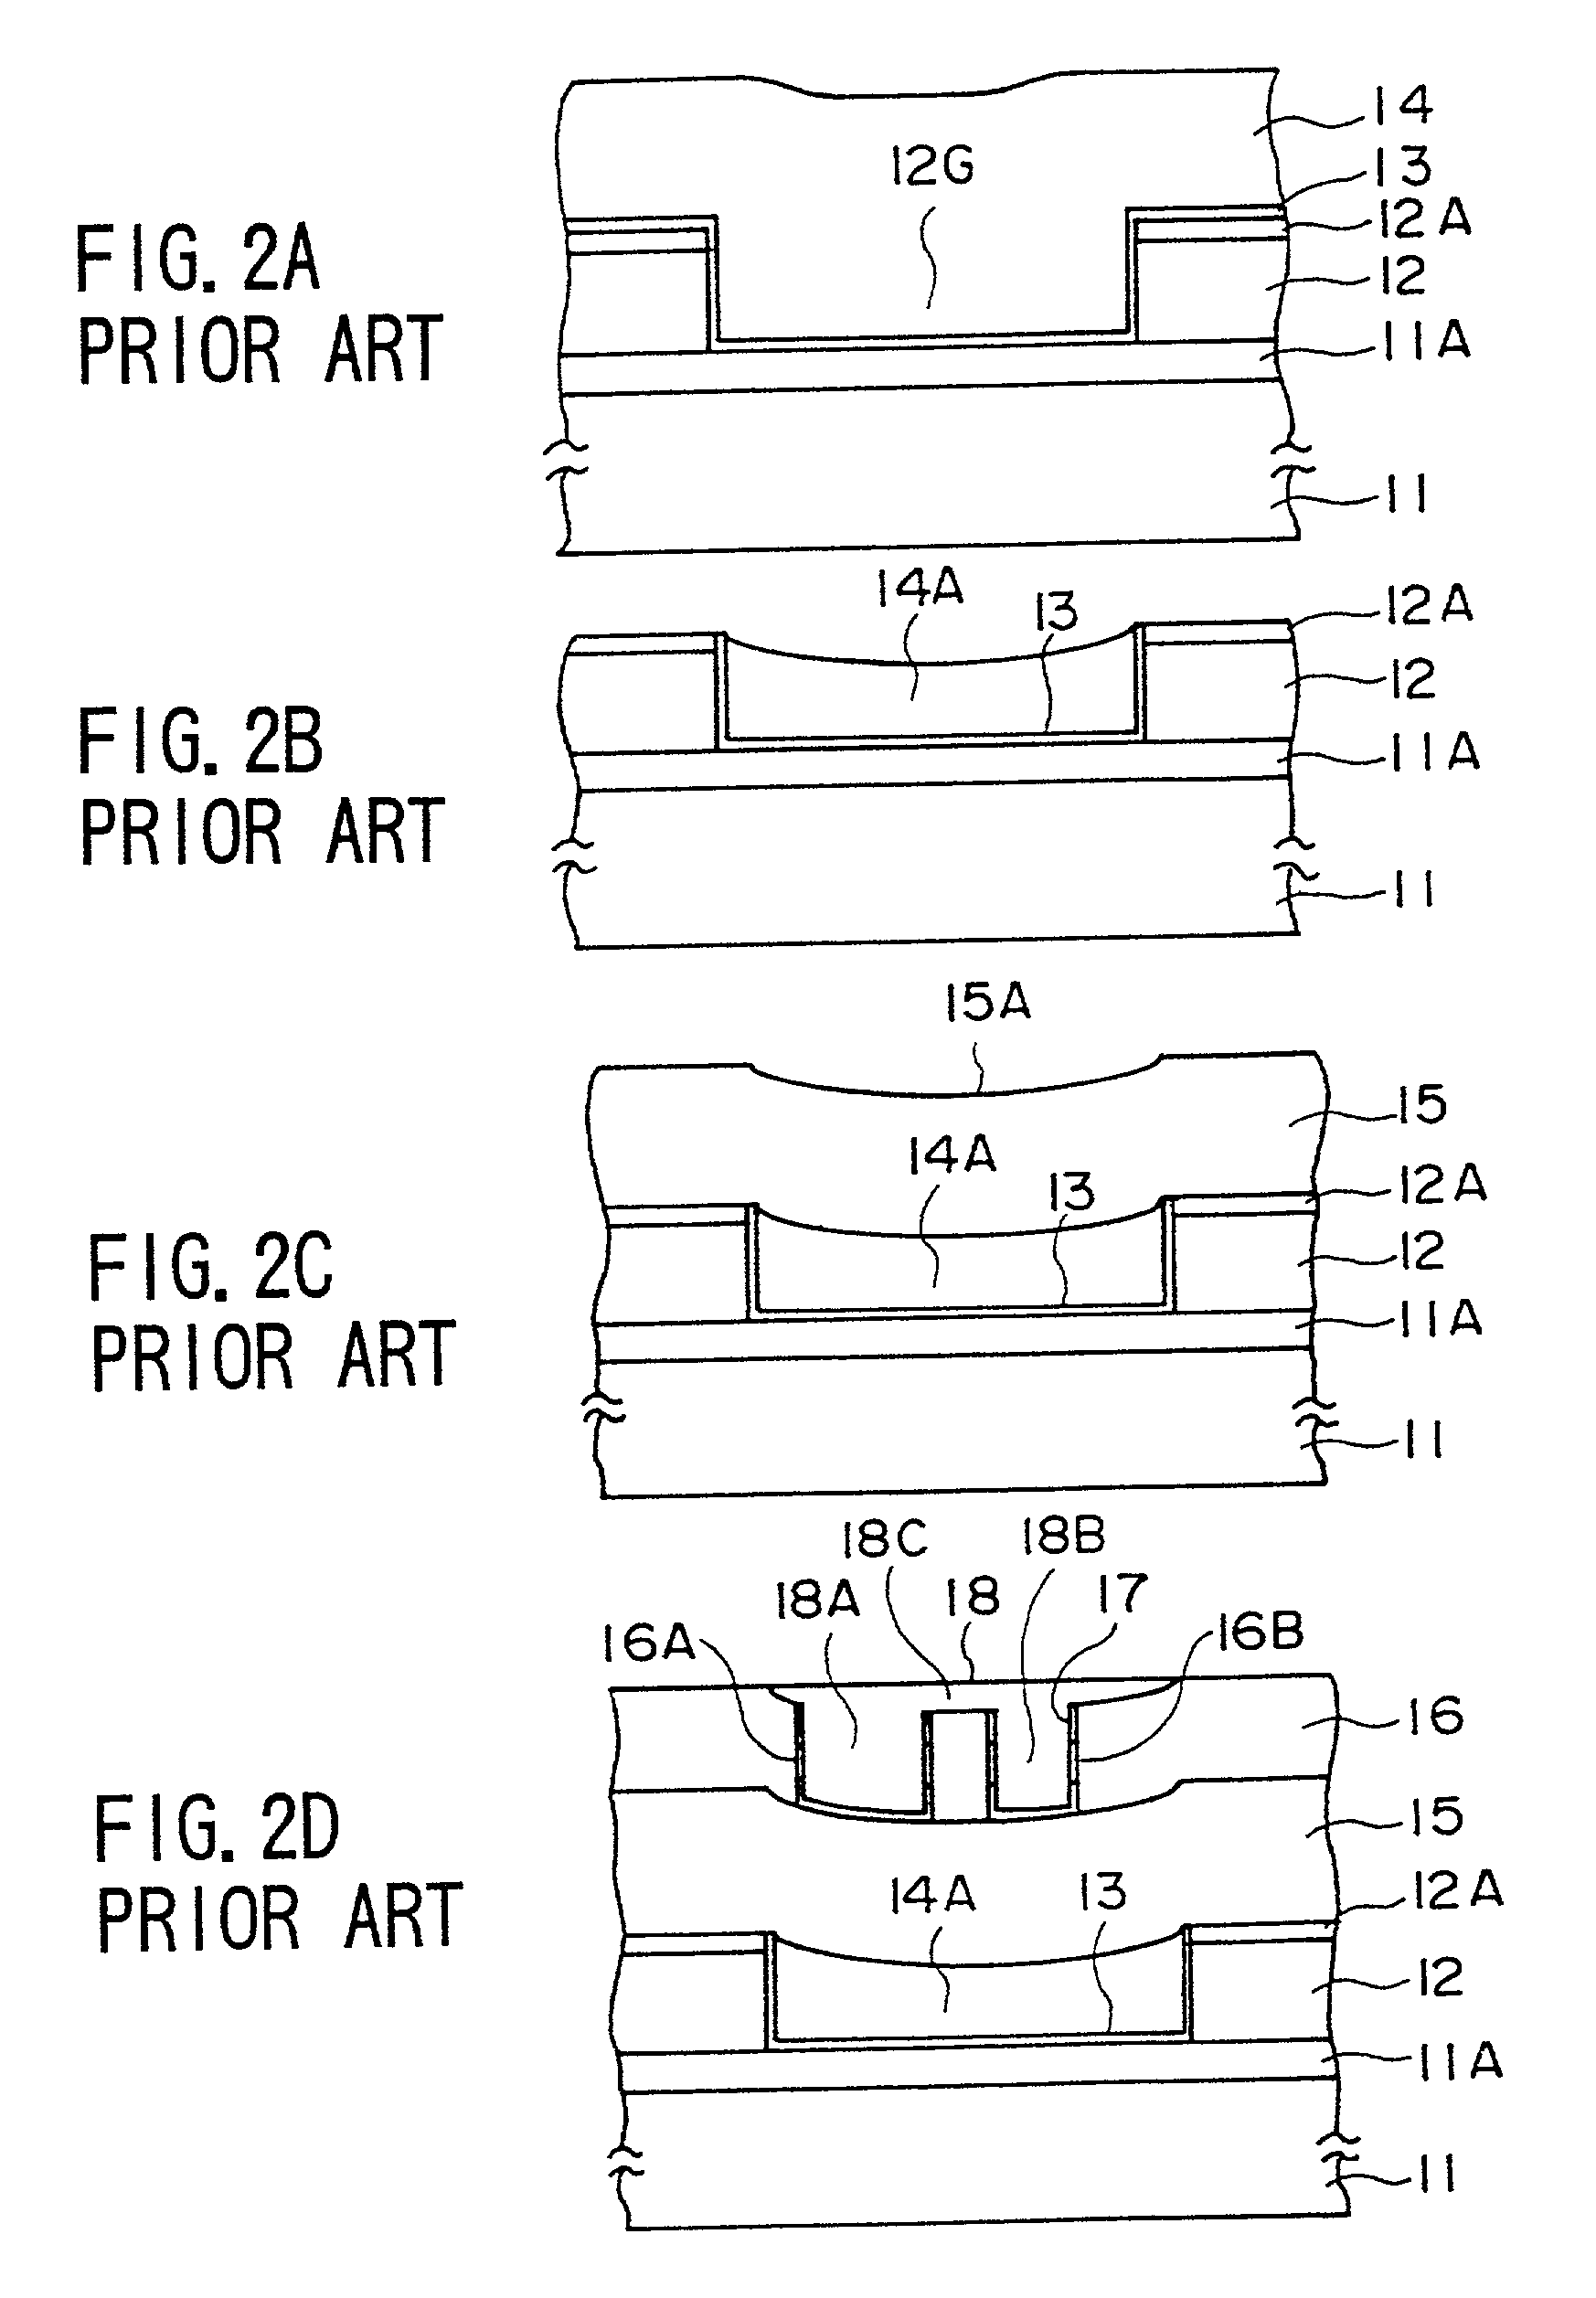 Semiconductor device having a multilayer interconnection structure